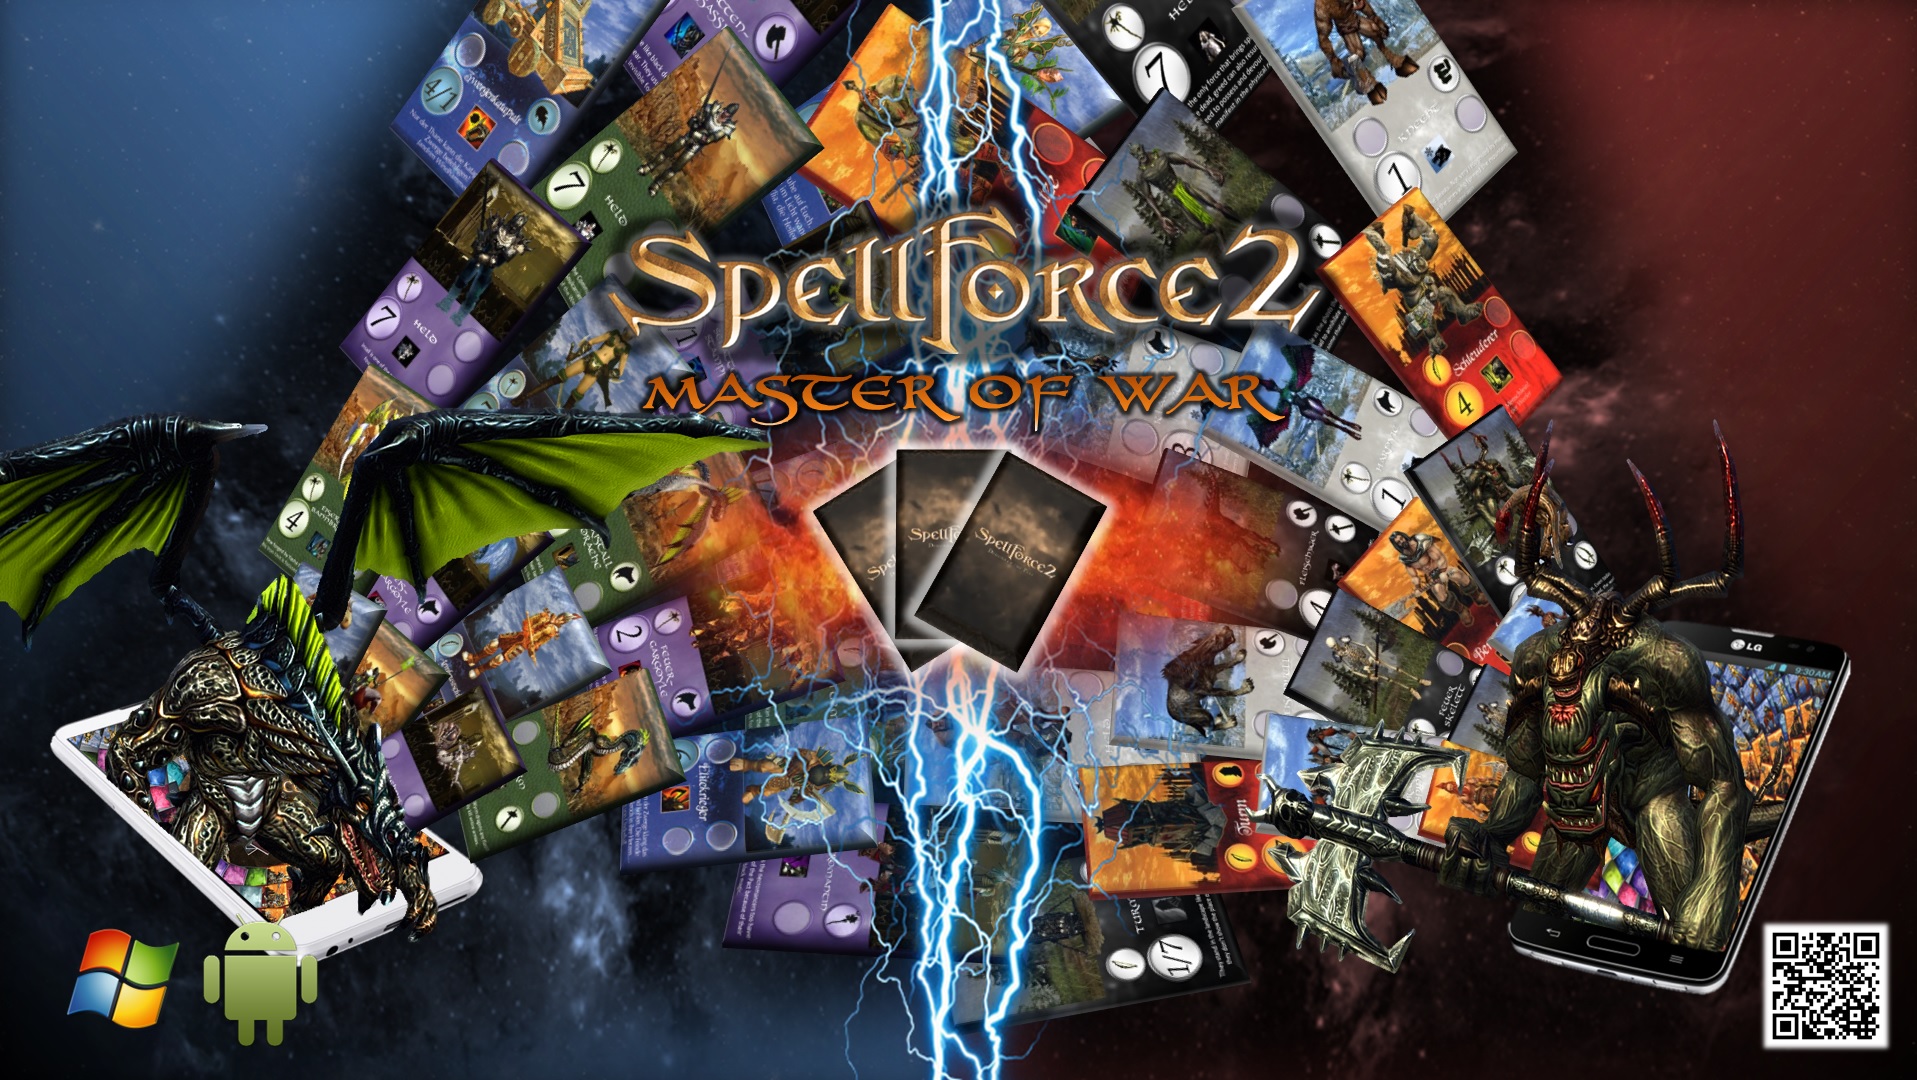 SpellForce: Conquest of Eo for ios download